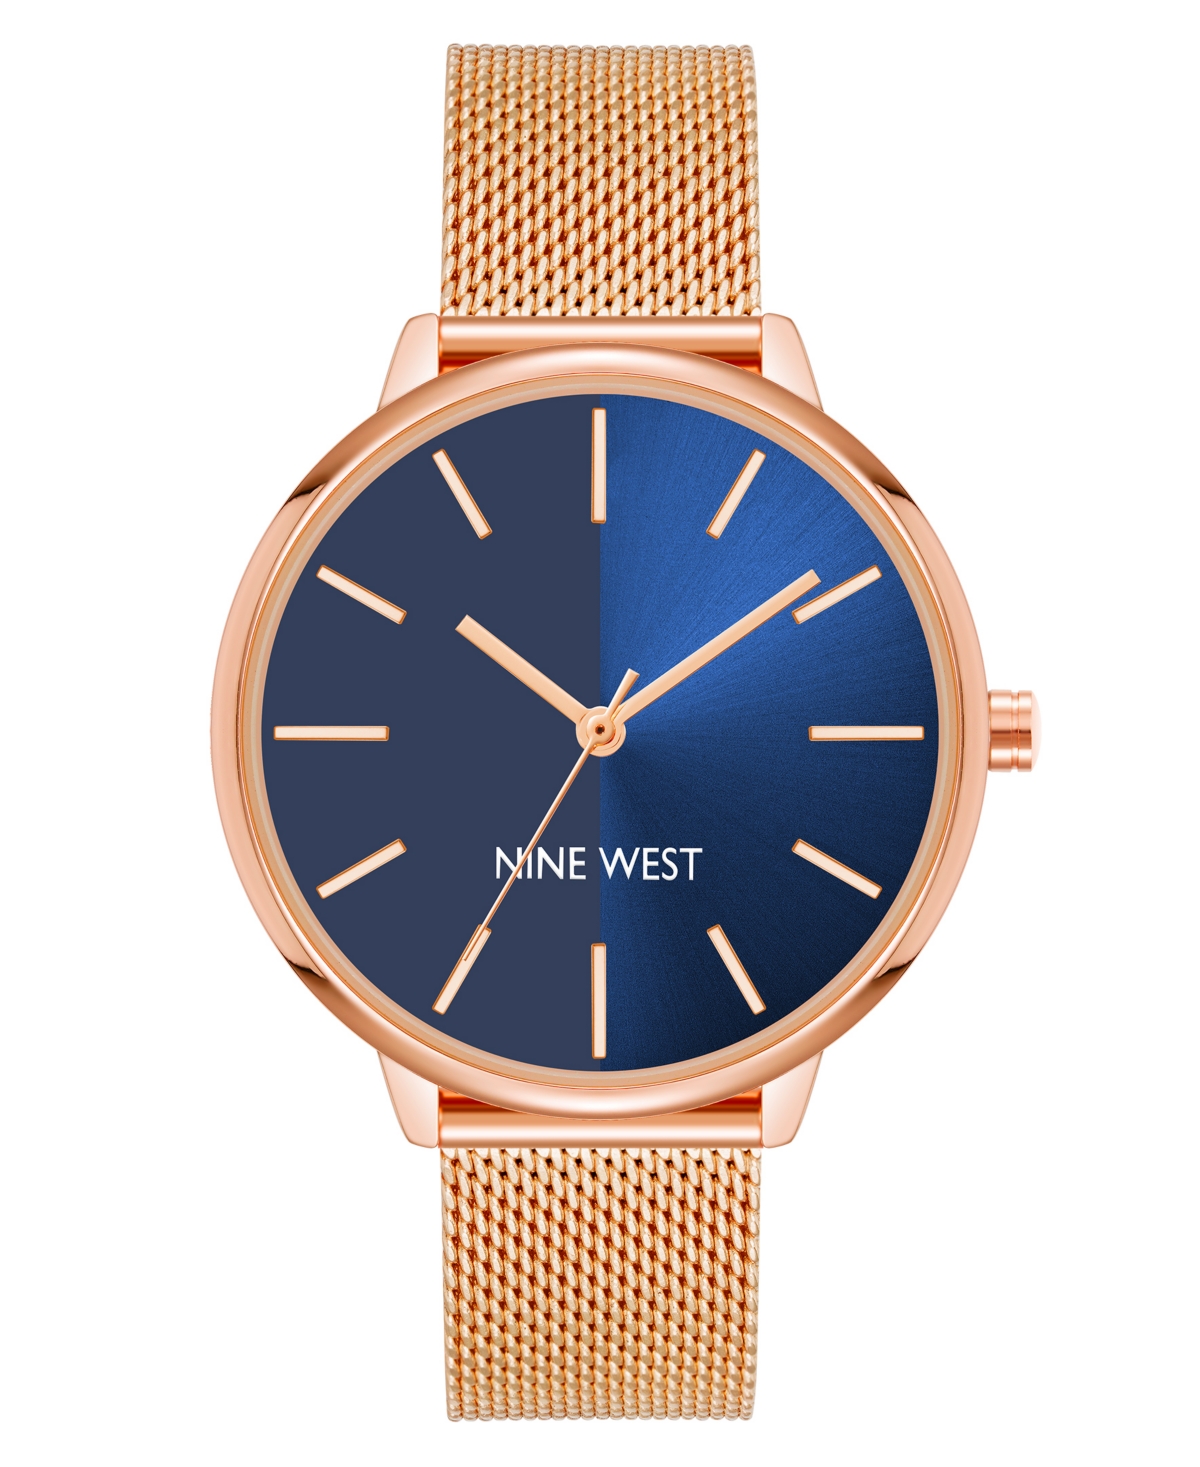 Nine West Women's Quartz Rose Gold-tone Stainless Steel Mesh Band Watch, 40mm In Navy,rose Gold-tone